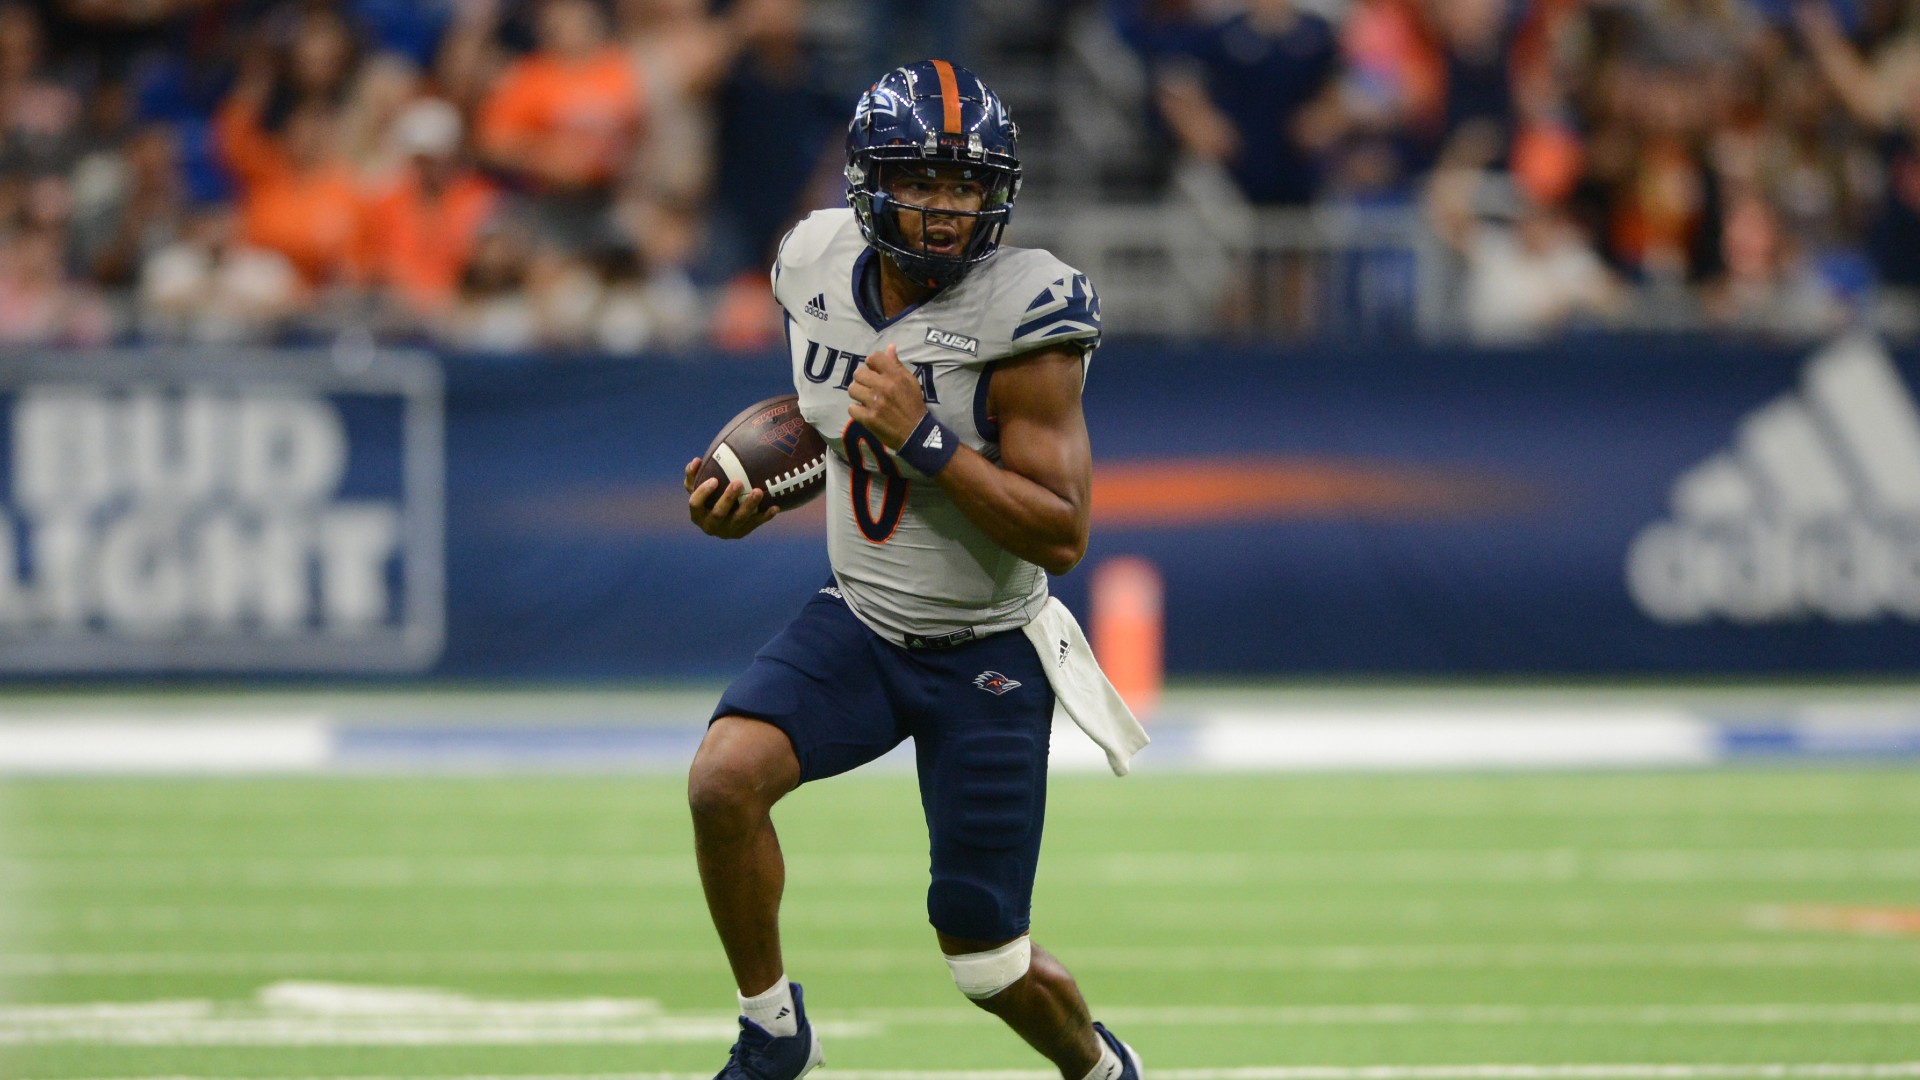 College Football Odds, Picks, Predictions for UTSA vs. Western Kentucky: Can Roadrunners Down Hilltoppers? article feature image